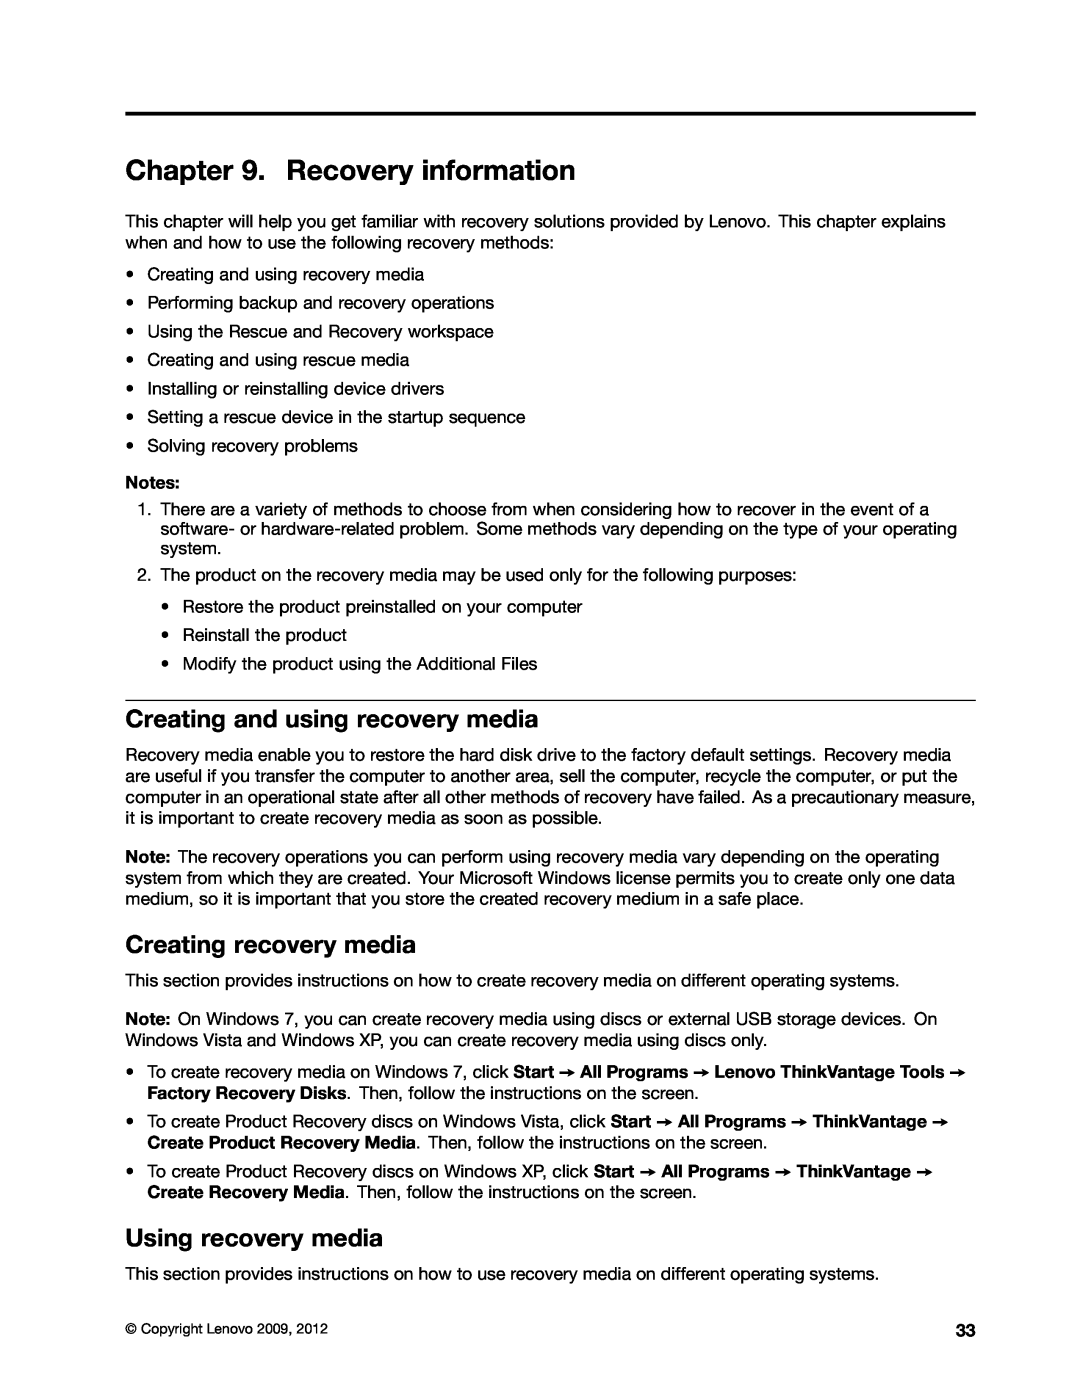 Lenovo 4157, 4105 Recovery information, Creating and using recovery media, Creating recovery media, Using recovery media 